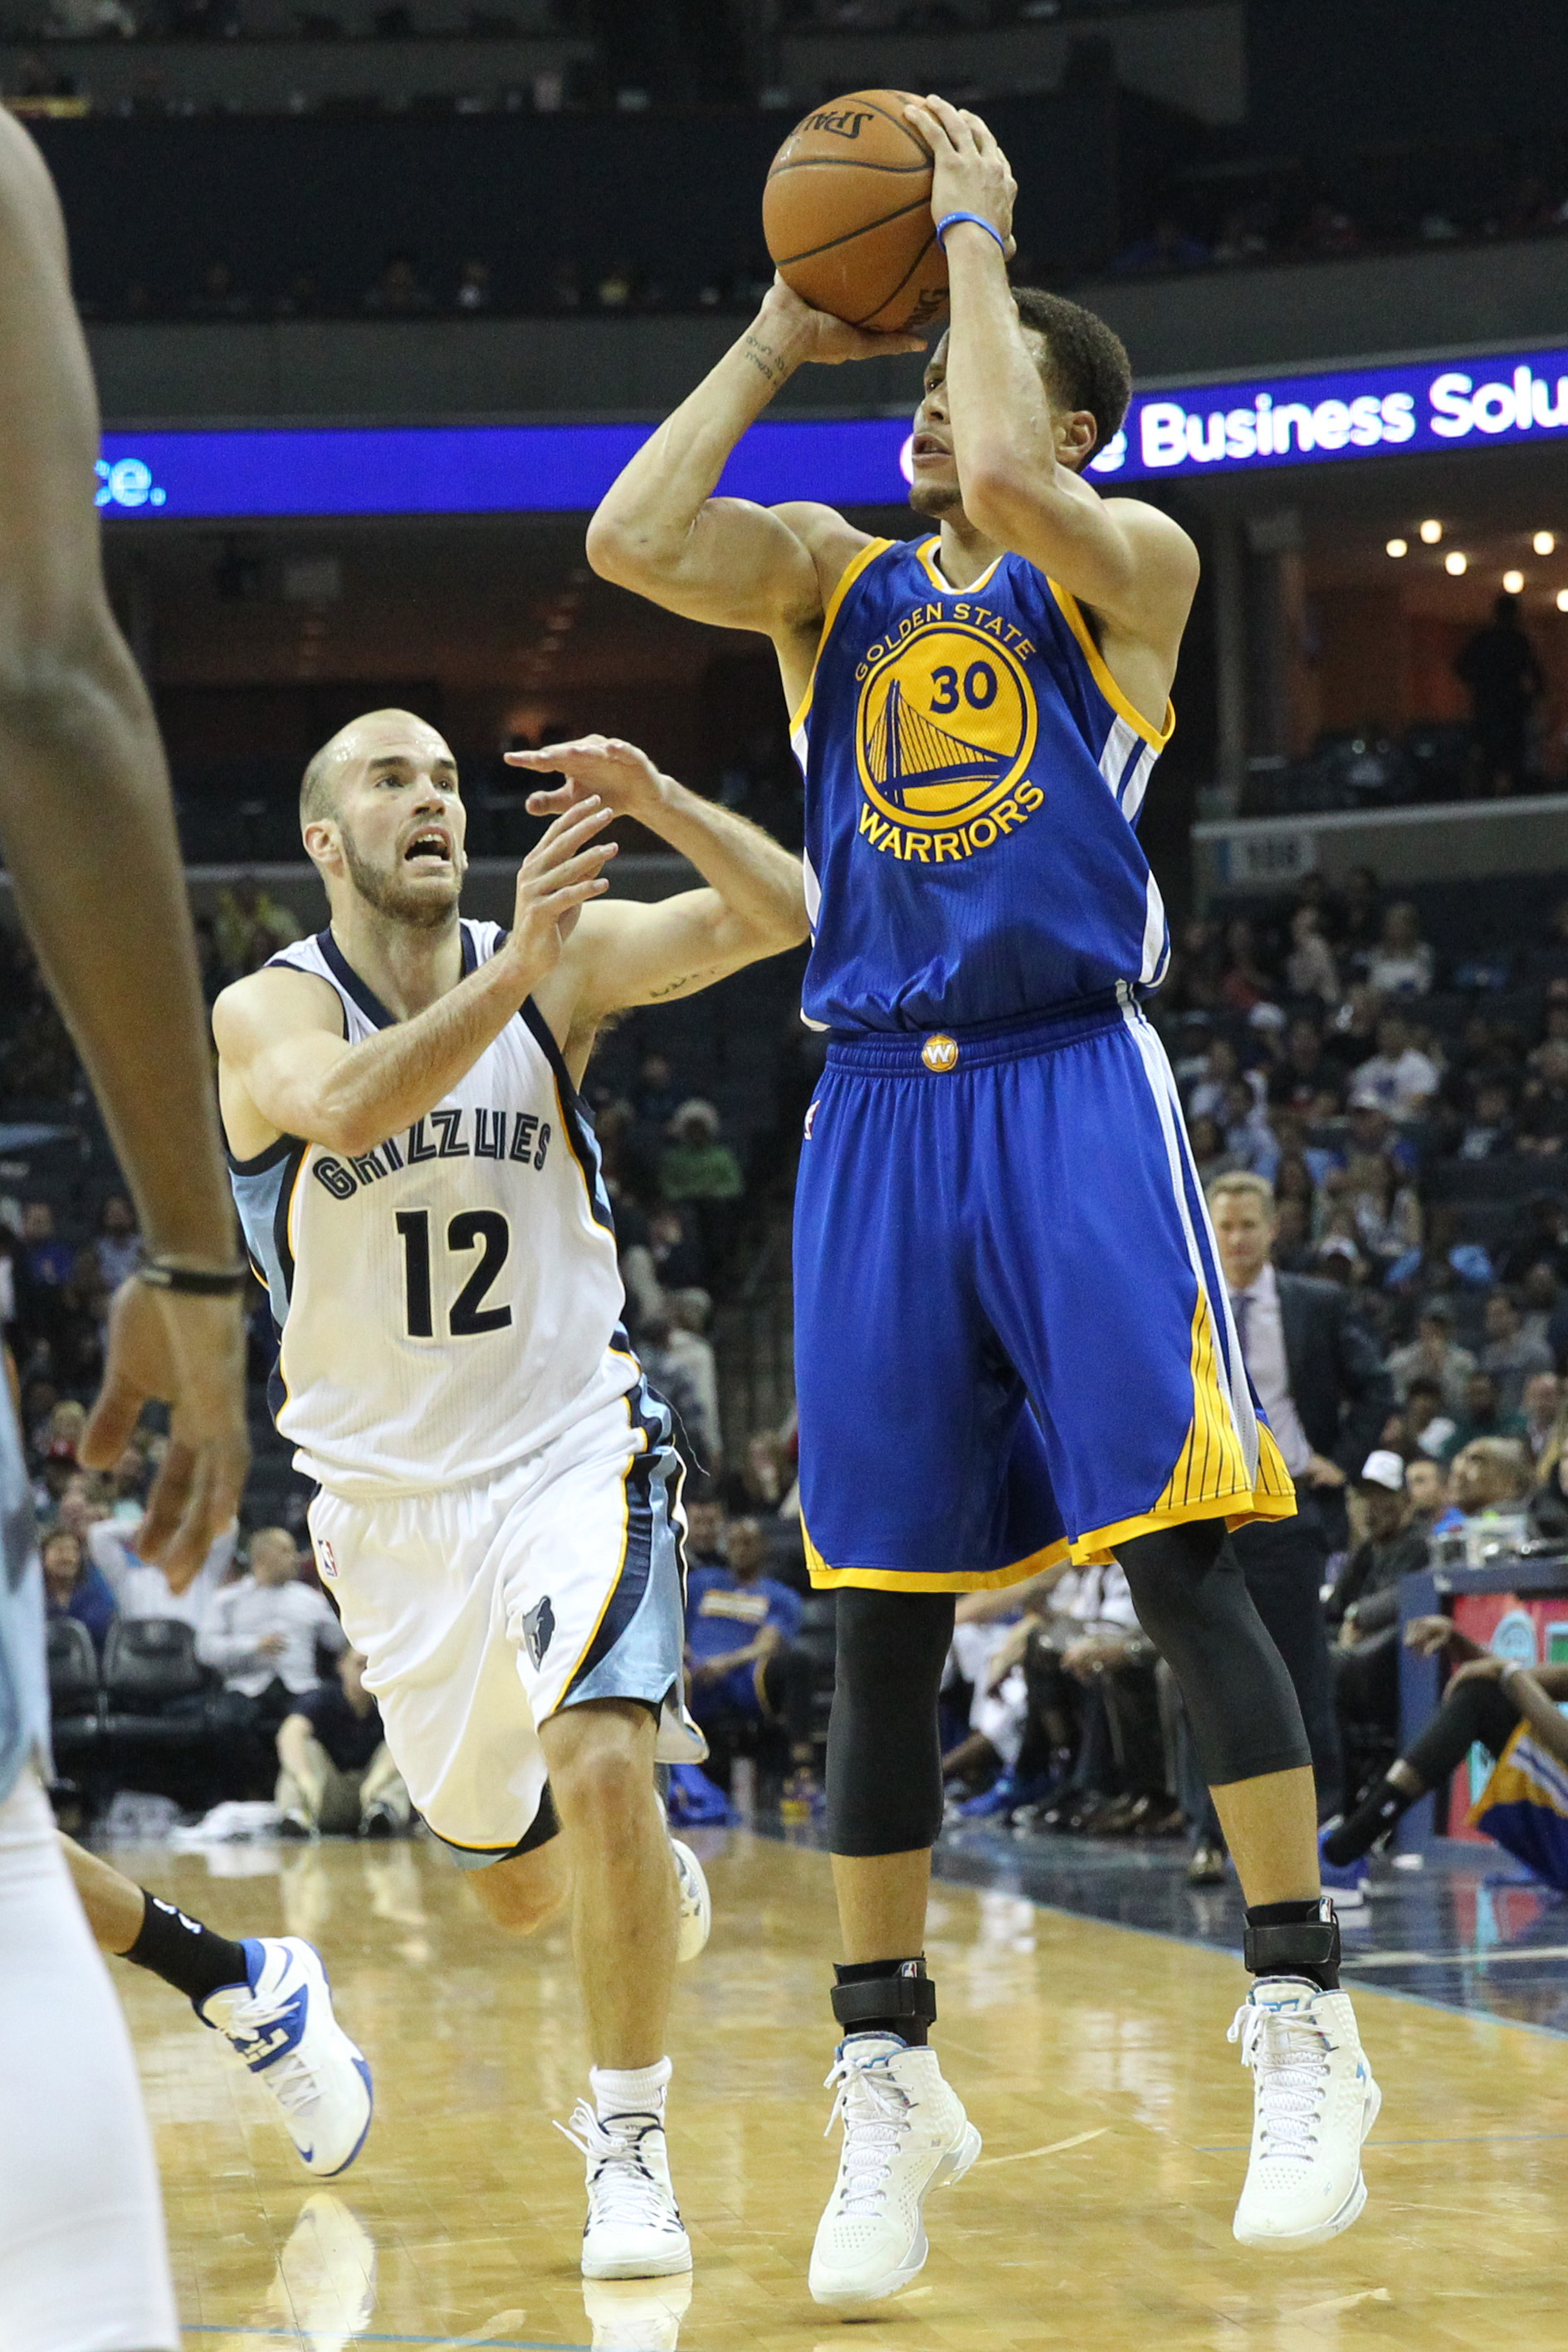 Mar 27, 2015; Memphis, TN, USA; Golden State Warriors guard Stephen Curry (30) attempts a shot in the second half against Memphis Grizzlies guard Nick Calathes (12) at FedExForum. Warriors defeated the Grizzlies 107-84. (Nelson Chenault-USA TODAY Sports)